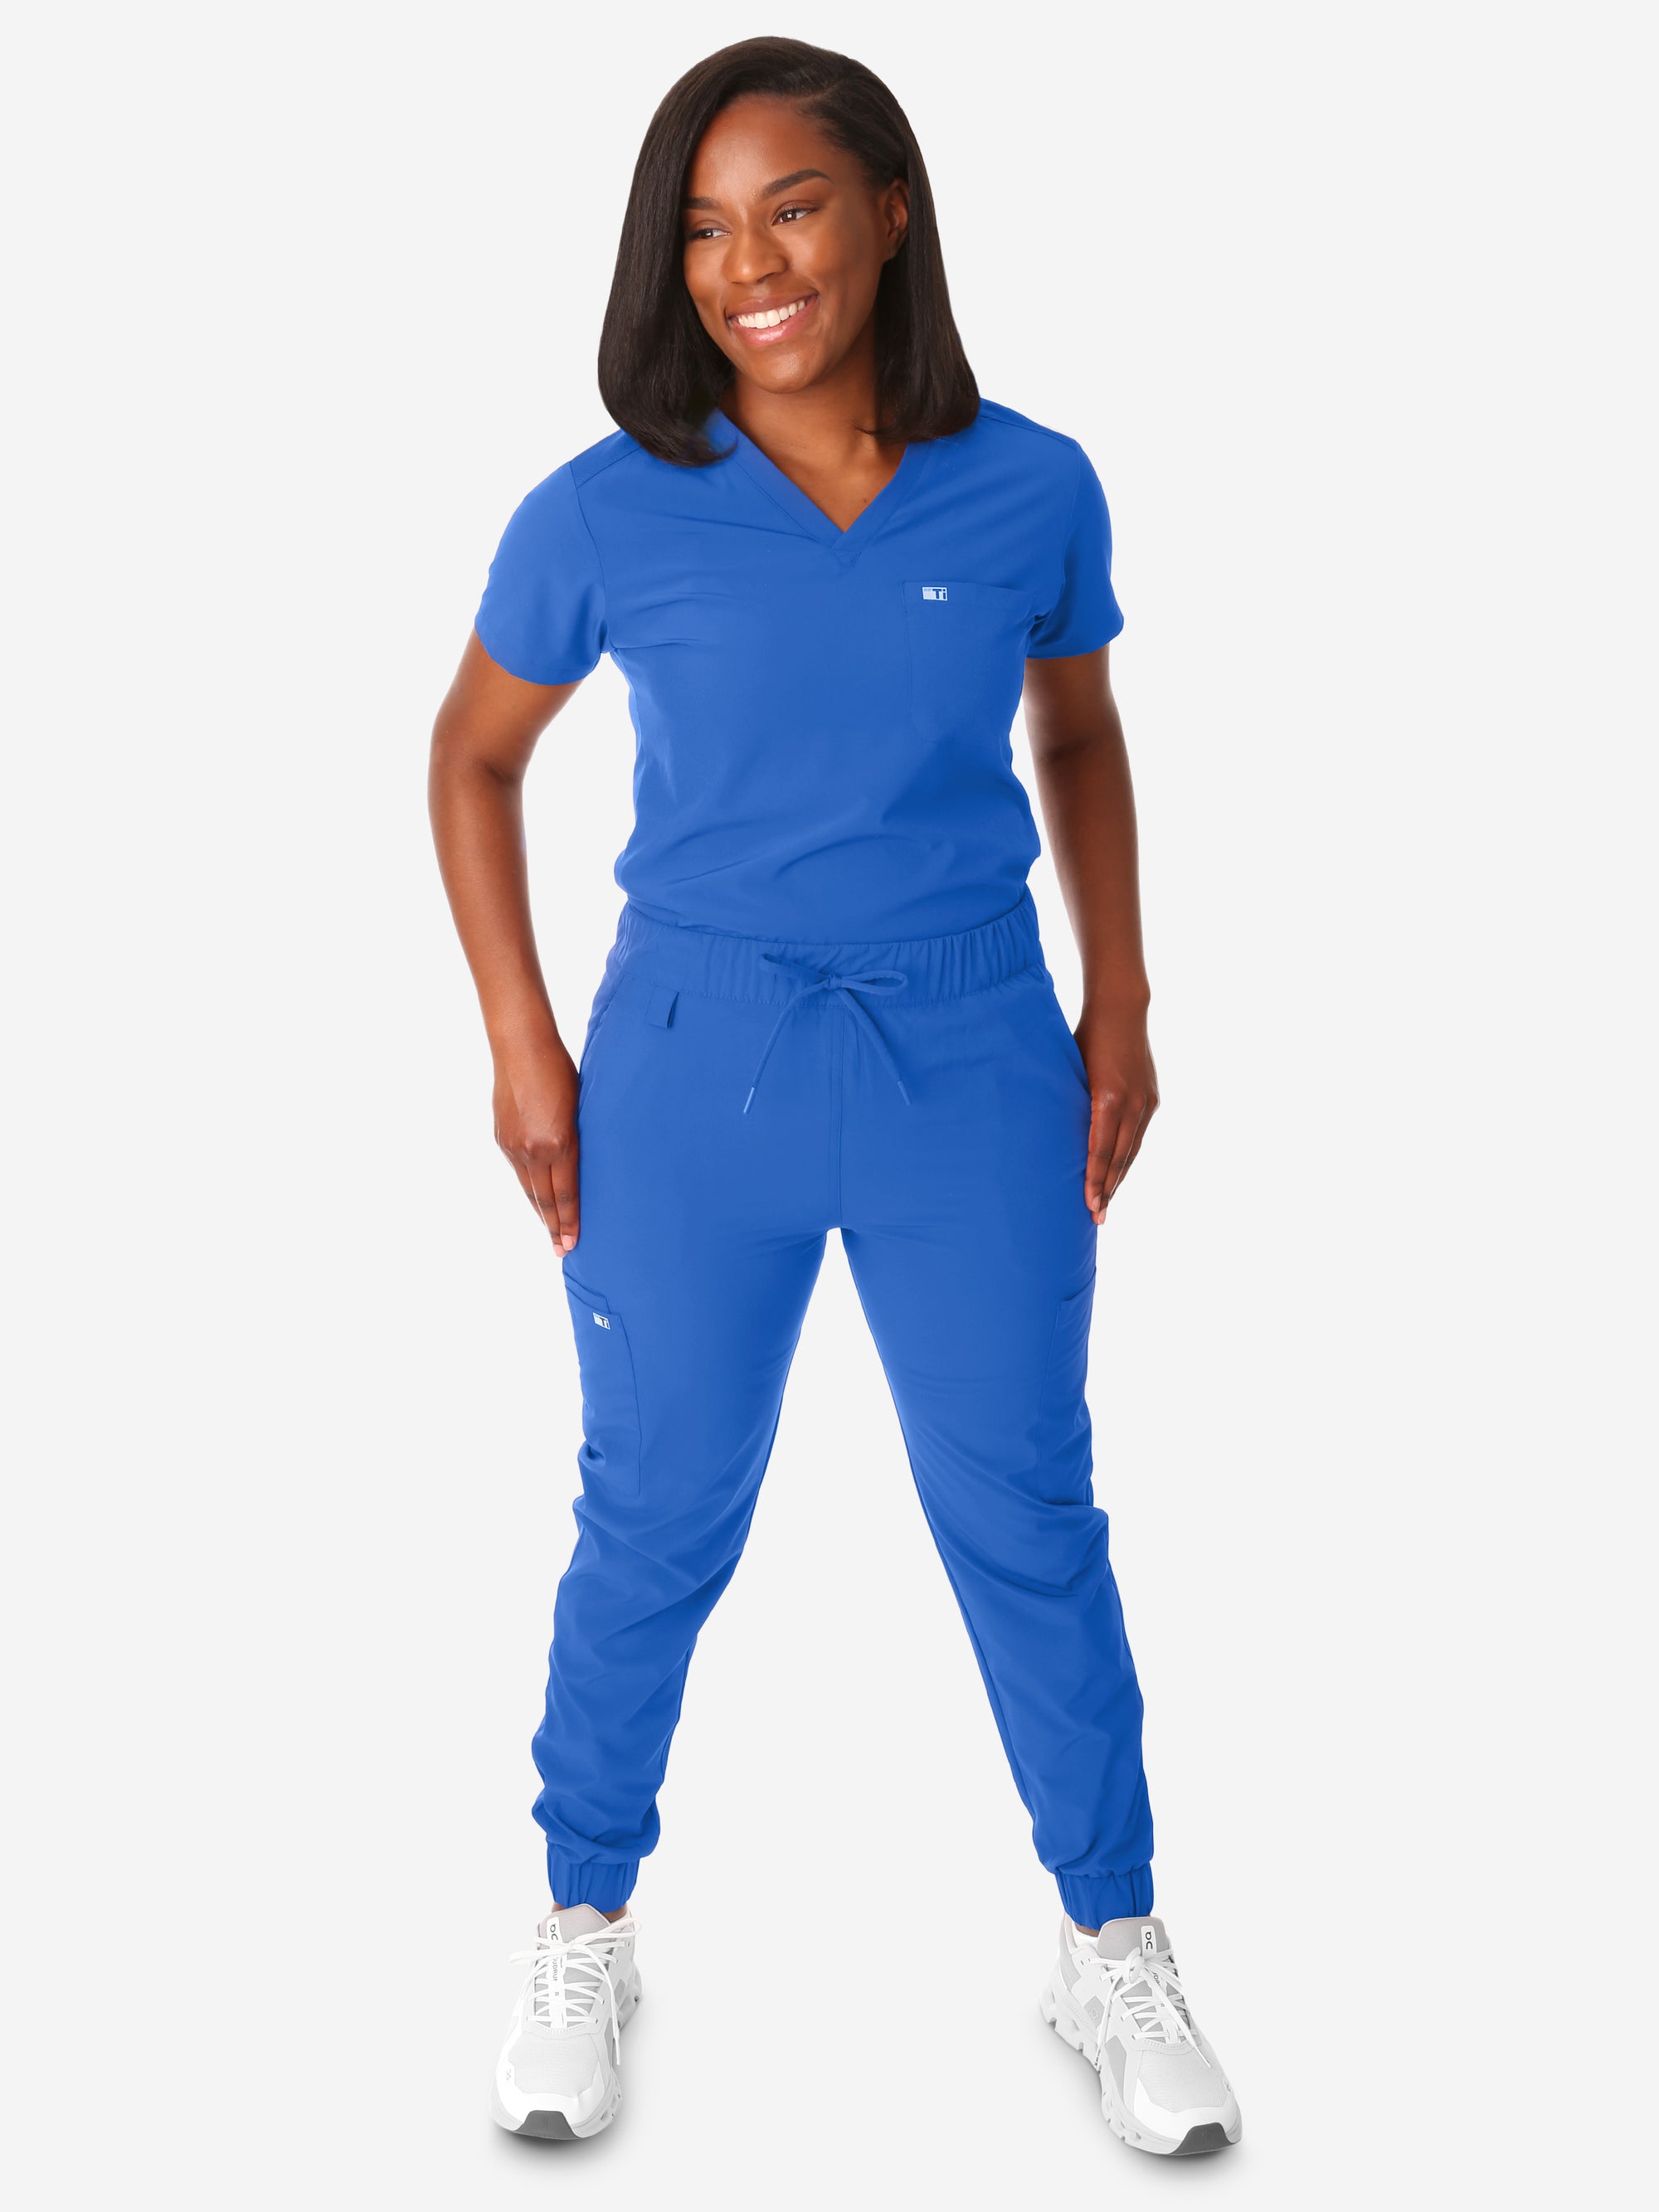 TiScrubs Royal Blue Women's Stretch Perfect Jogger Pants and One-Pocket Tuckable Top Front View Full Body